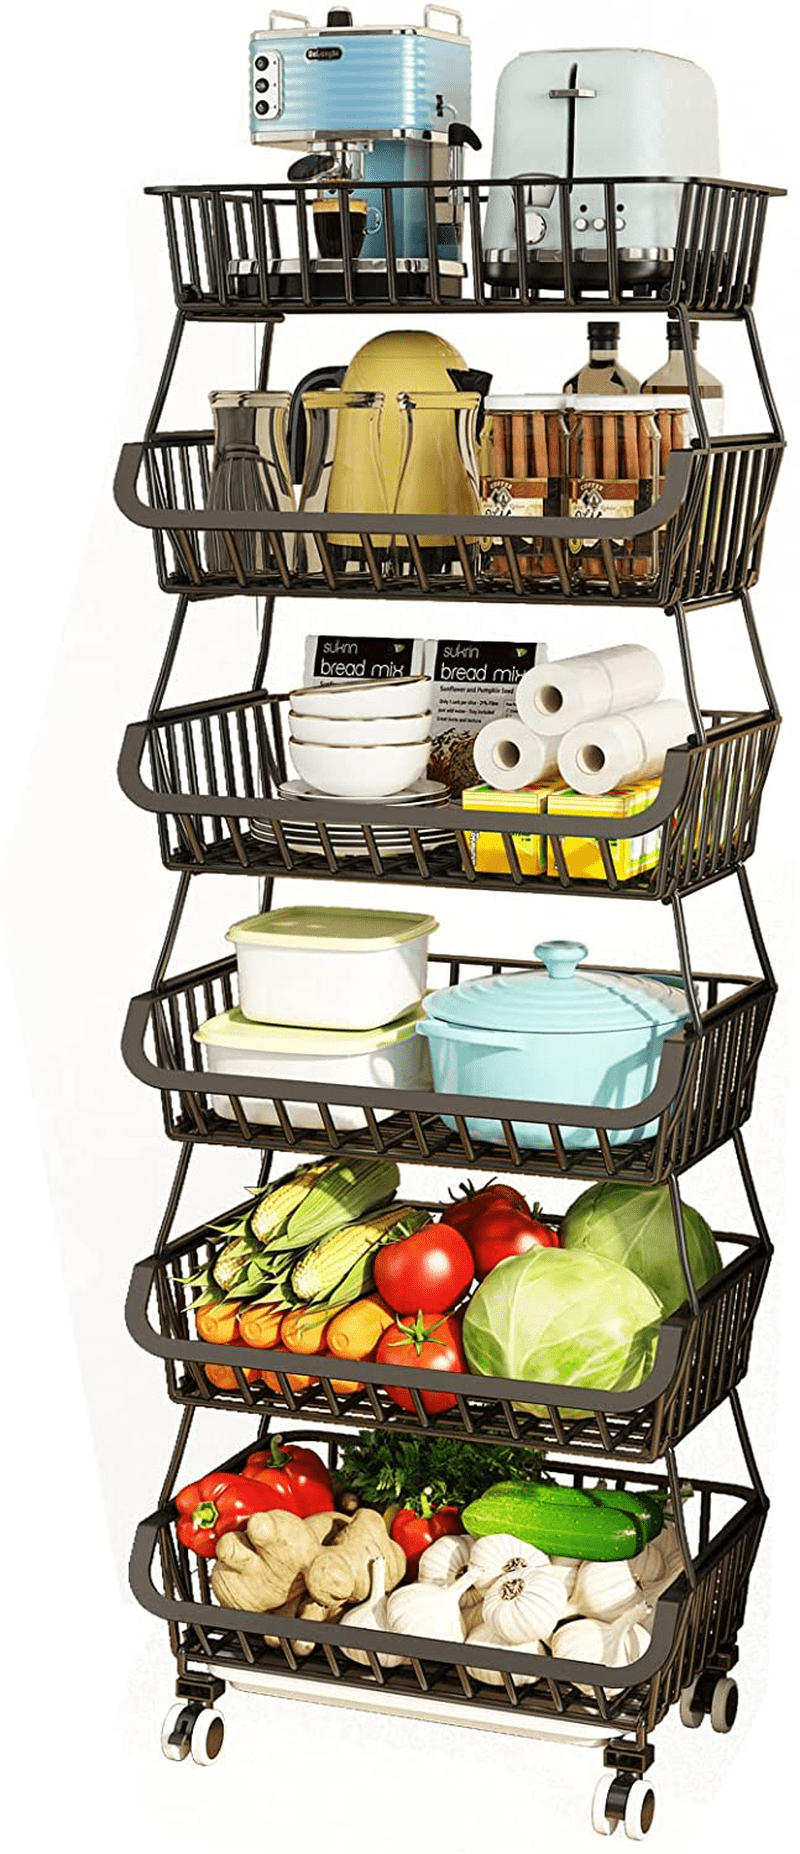 Wisdom Star 6 Tier Fruit Vegetable Basket for Kitchen, Fruit Vegetable Storage Cart, Vegetable Basket Bins for Onions and Potatoes, Wire Storage Basket Organizer Utility Cart with Wheels, Black Home & Garden > Kitchen & Dining > Food Storage Wisdom Star 6 TIER  